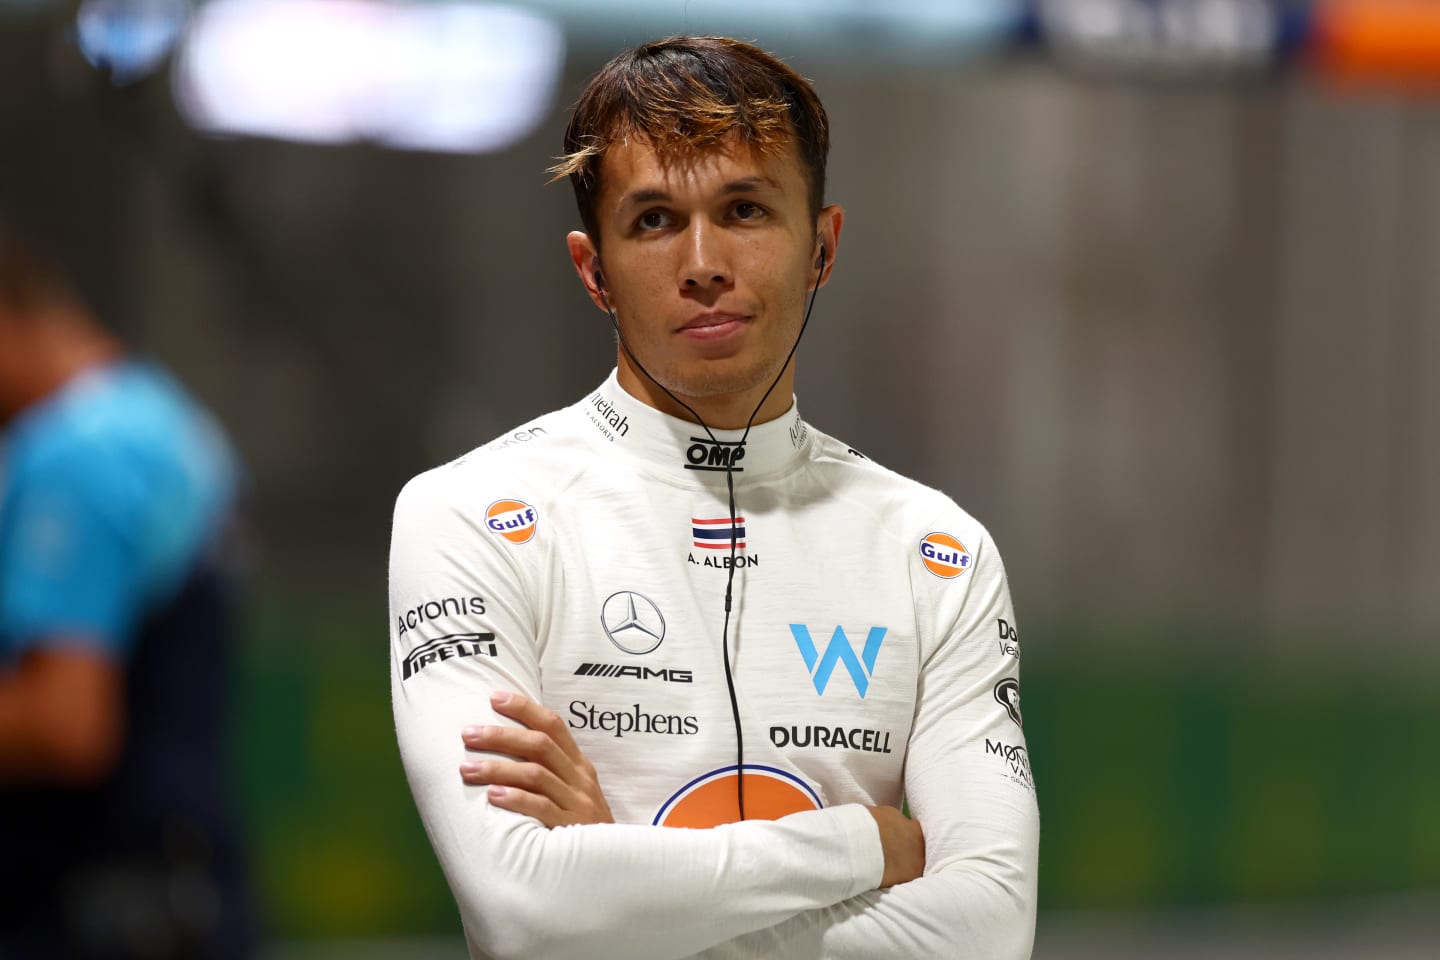 SINGAPORE, SINGAPORE - SEPTEMBER 16: Alexander Albon of Thailand and Williams looks on in the Pitlane during a red flag period during qualifying ahead of the F1 Grand Prix of Singapore at Marina Bay Street Circuit on September 16, 2023 in Singapore, Singapore. (Photo by Bryn Lennon - Formula 1/Formula 1 via Getty Images)